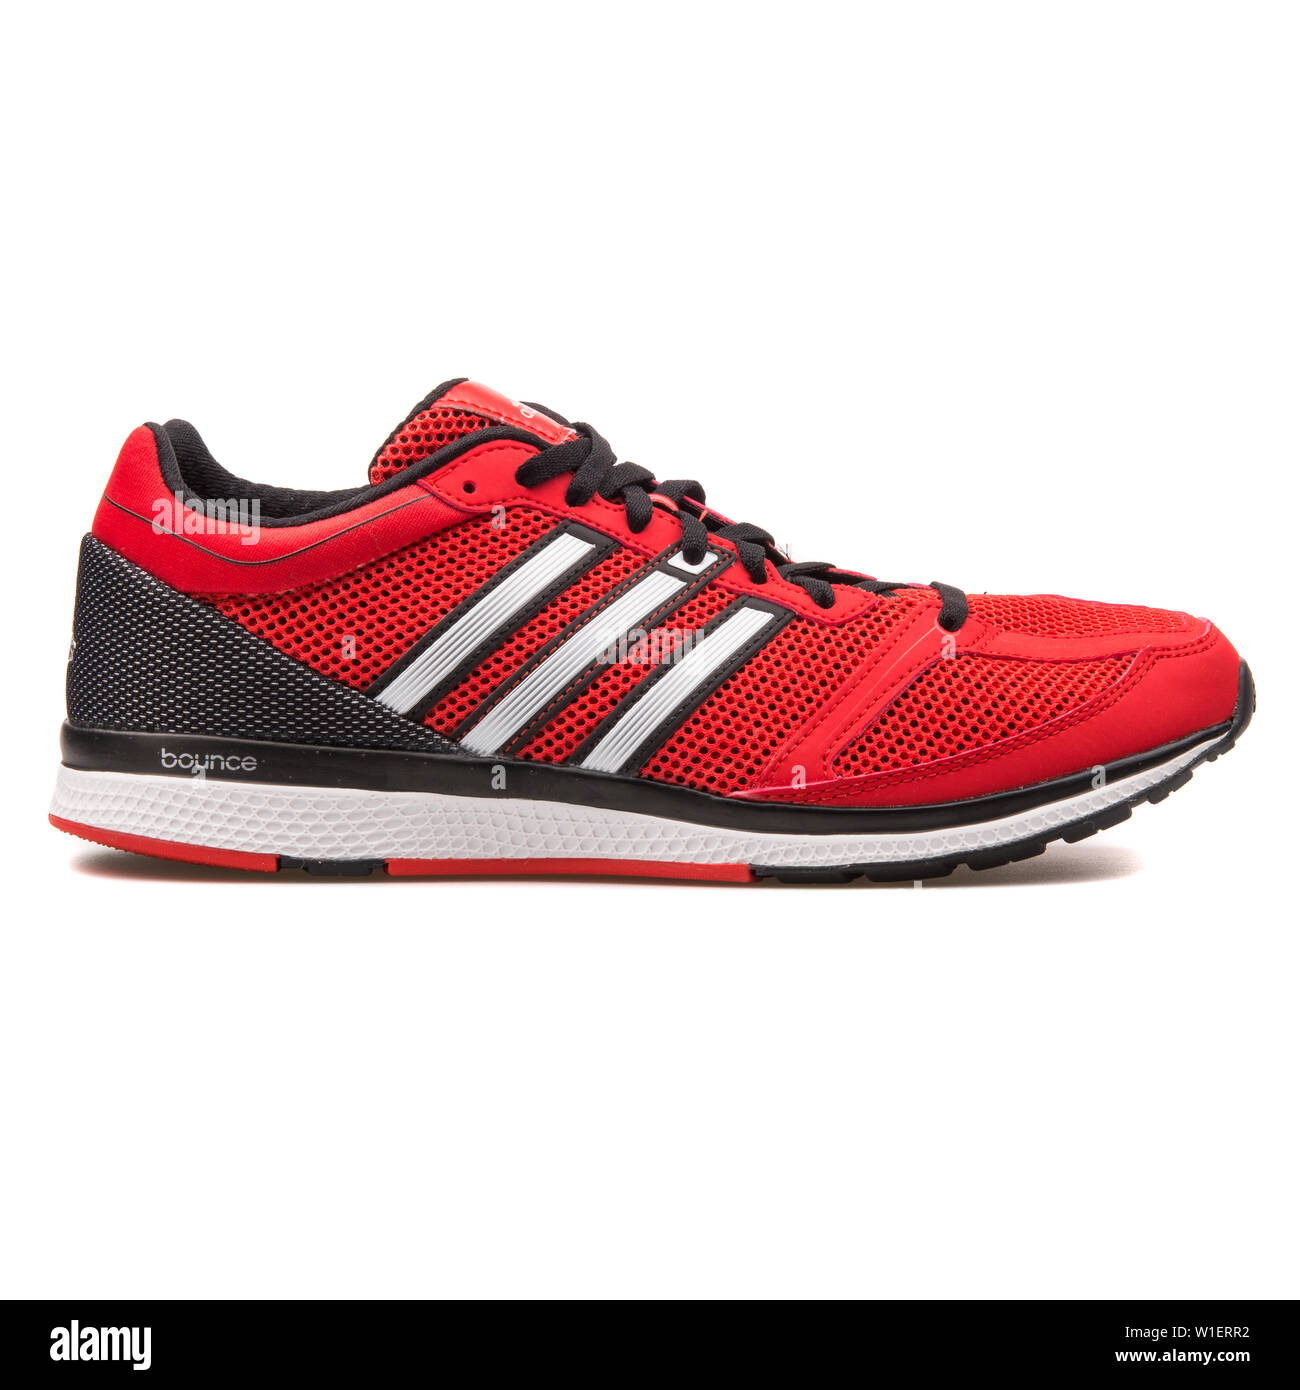 VIENNA, AUSTRIA - AUGUST 10, 2017: Adidas Mana RC Bounce red, black and  white sneaker on white background Stock Photo - Alamy